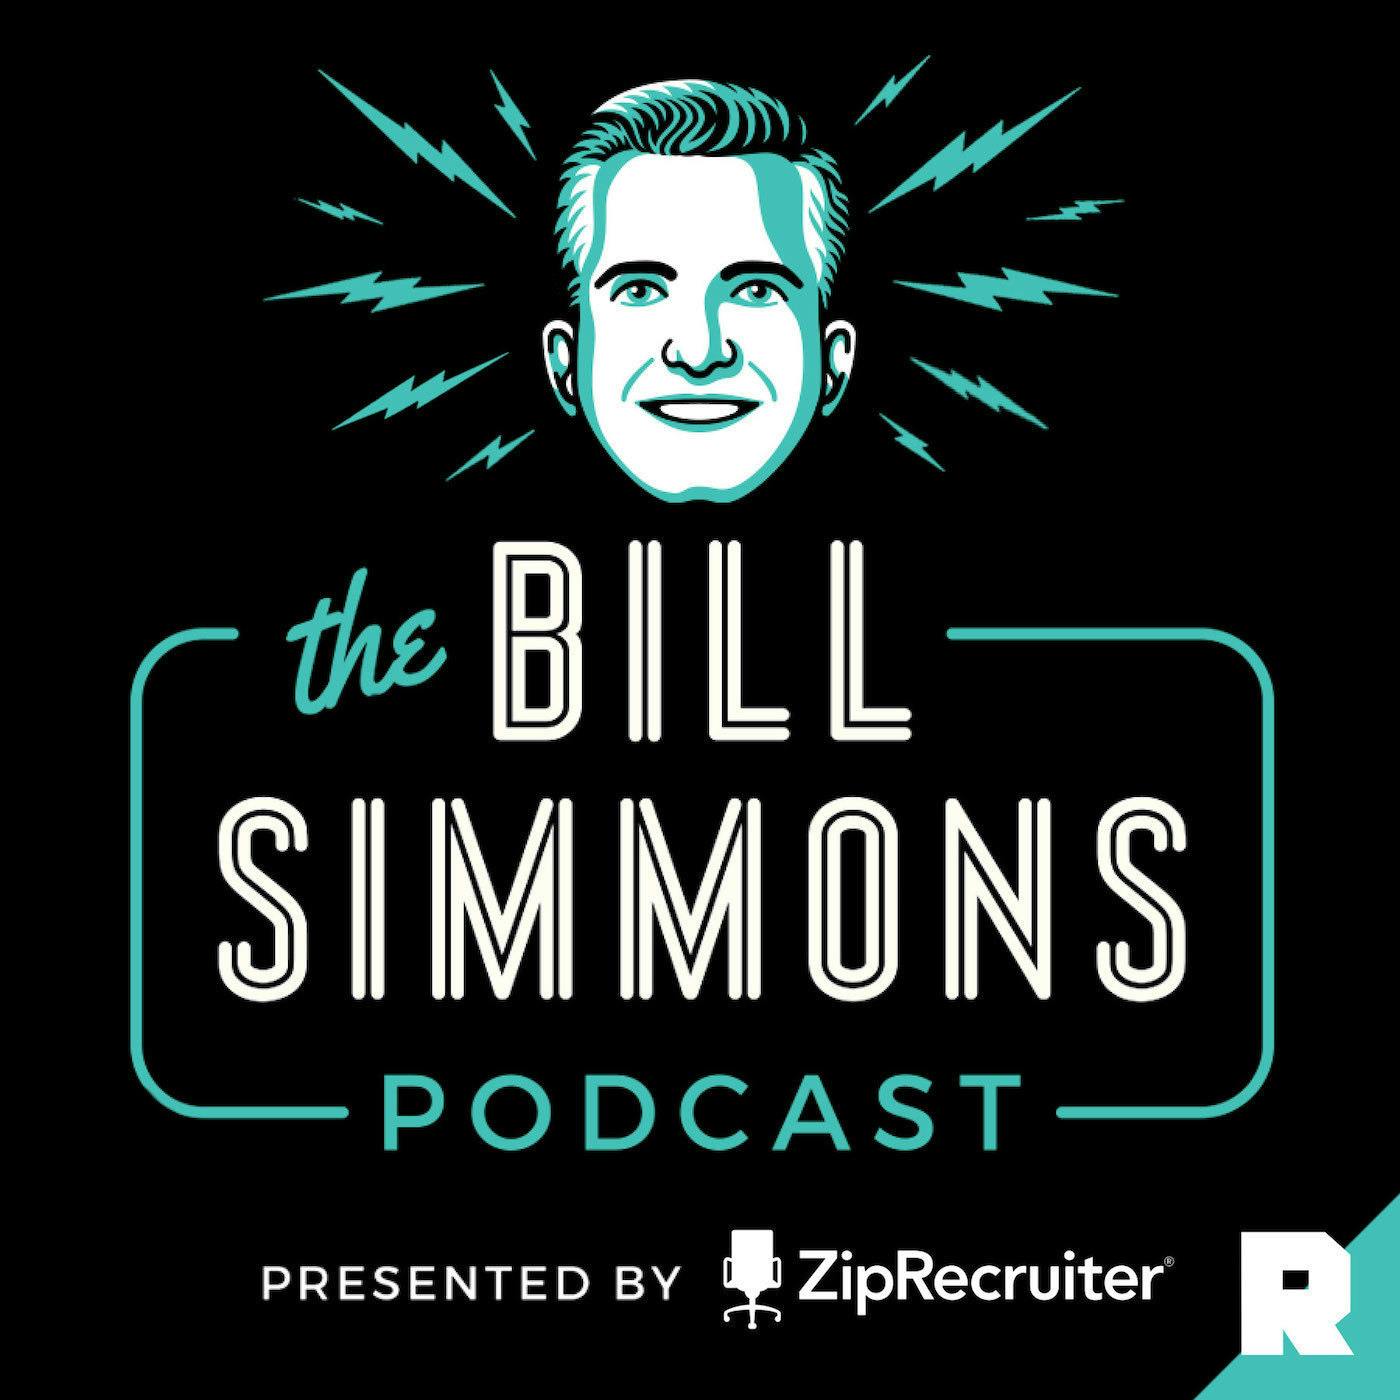 The Boston Massacre, Teen Culture Watch, and ’Succession’ With JackO, Zoe Simmons, and Chris Ryan | The Bill Simmons Podcast (Ep. 397)